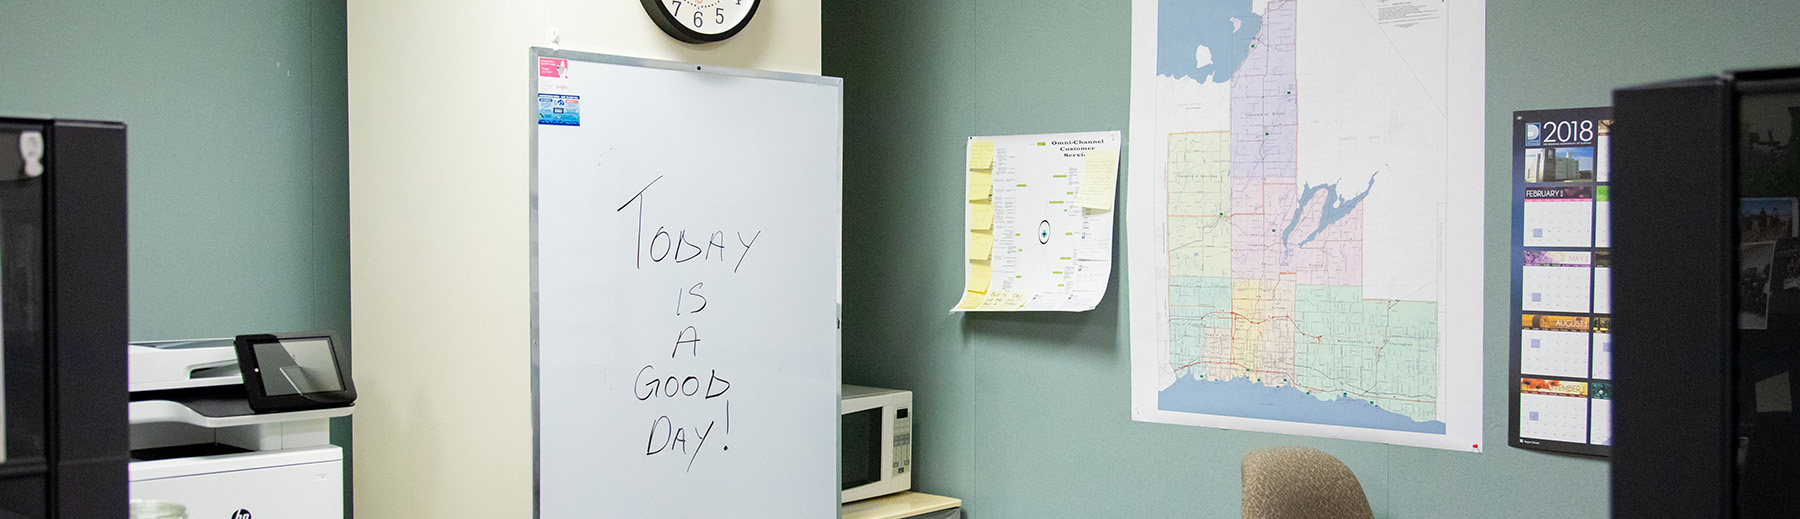 A whiteboard in an office with "Today is a good day!" written on it